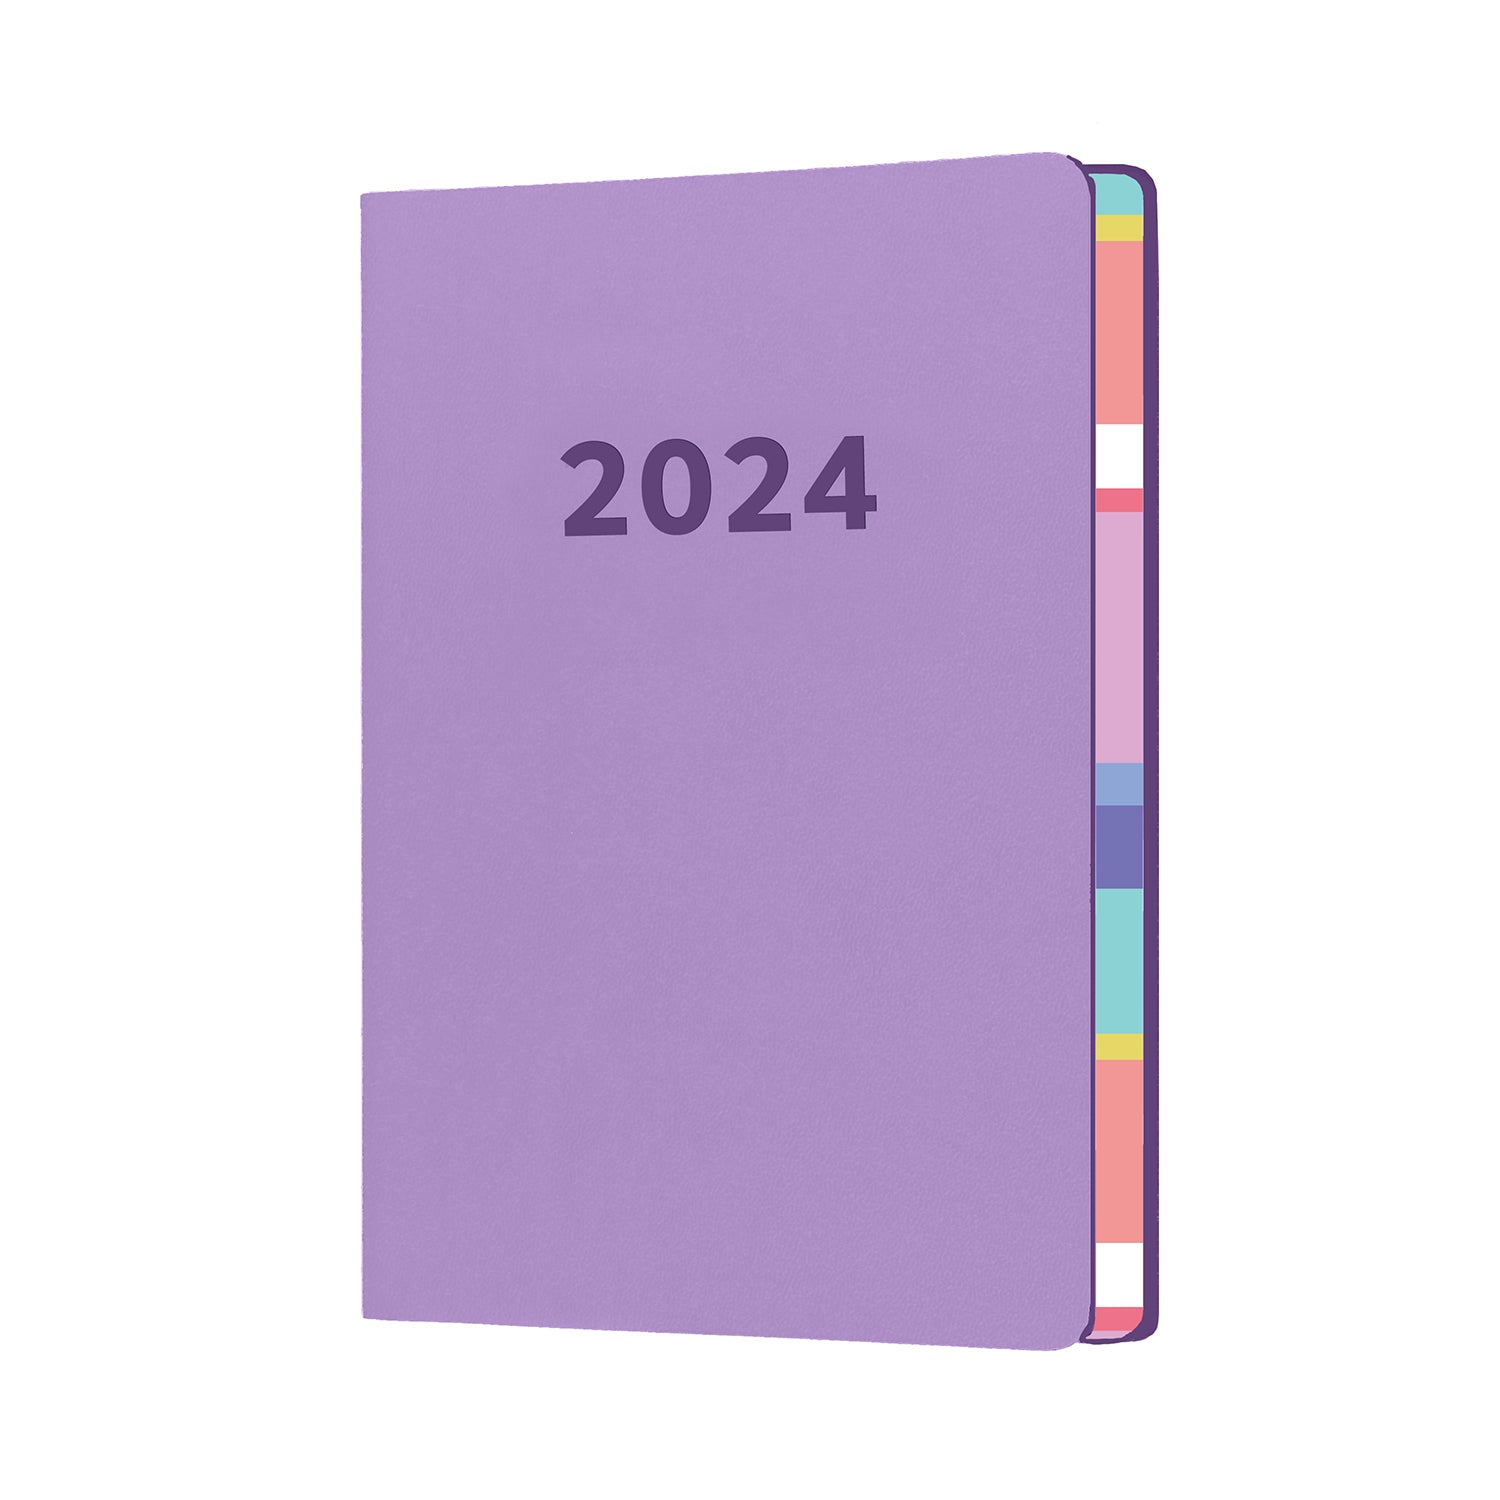 2024 Yes Purple Planner bloc-notes